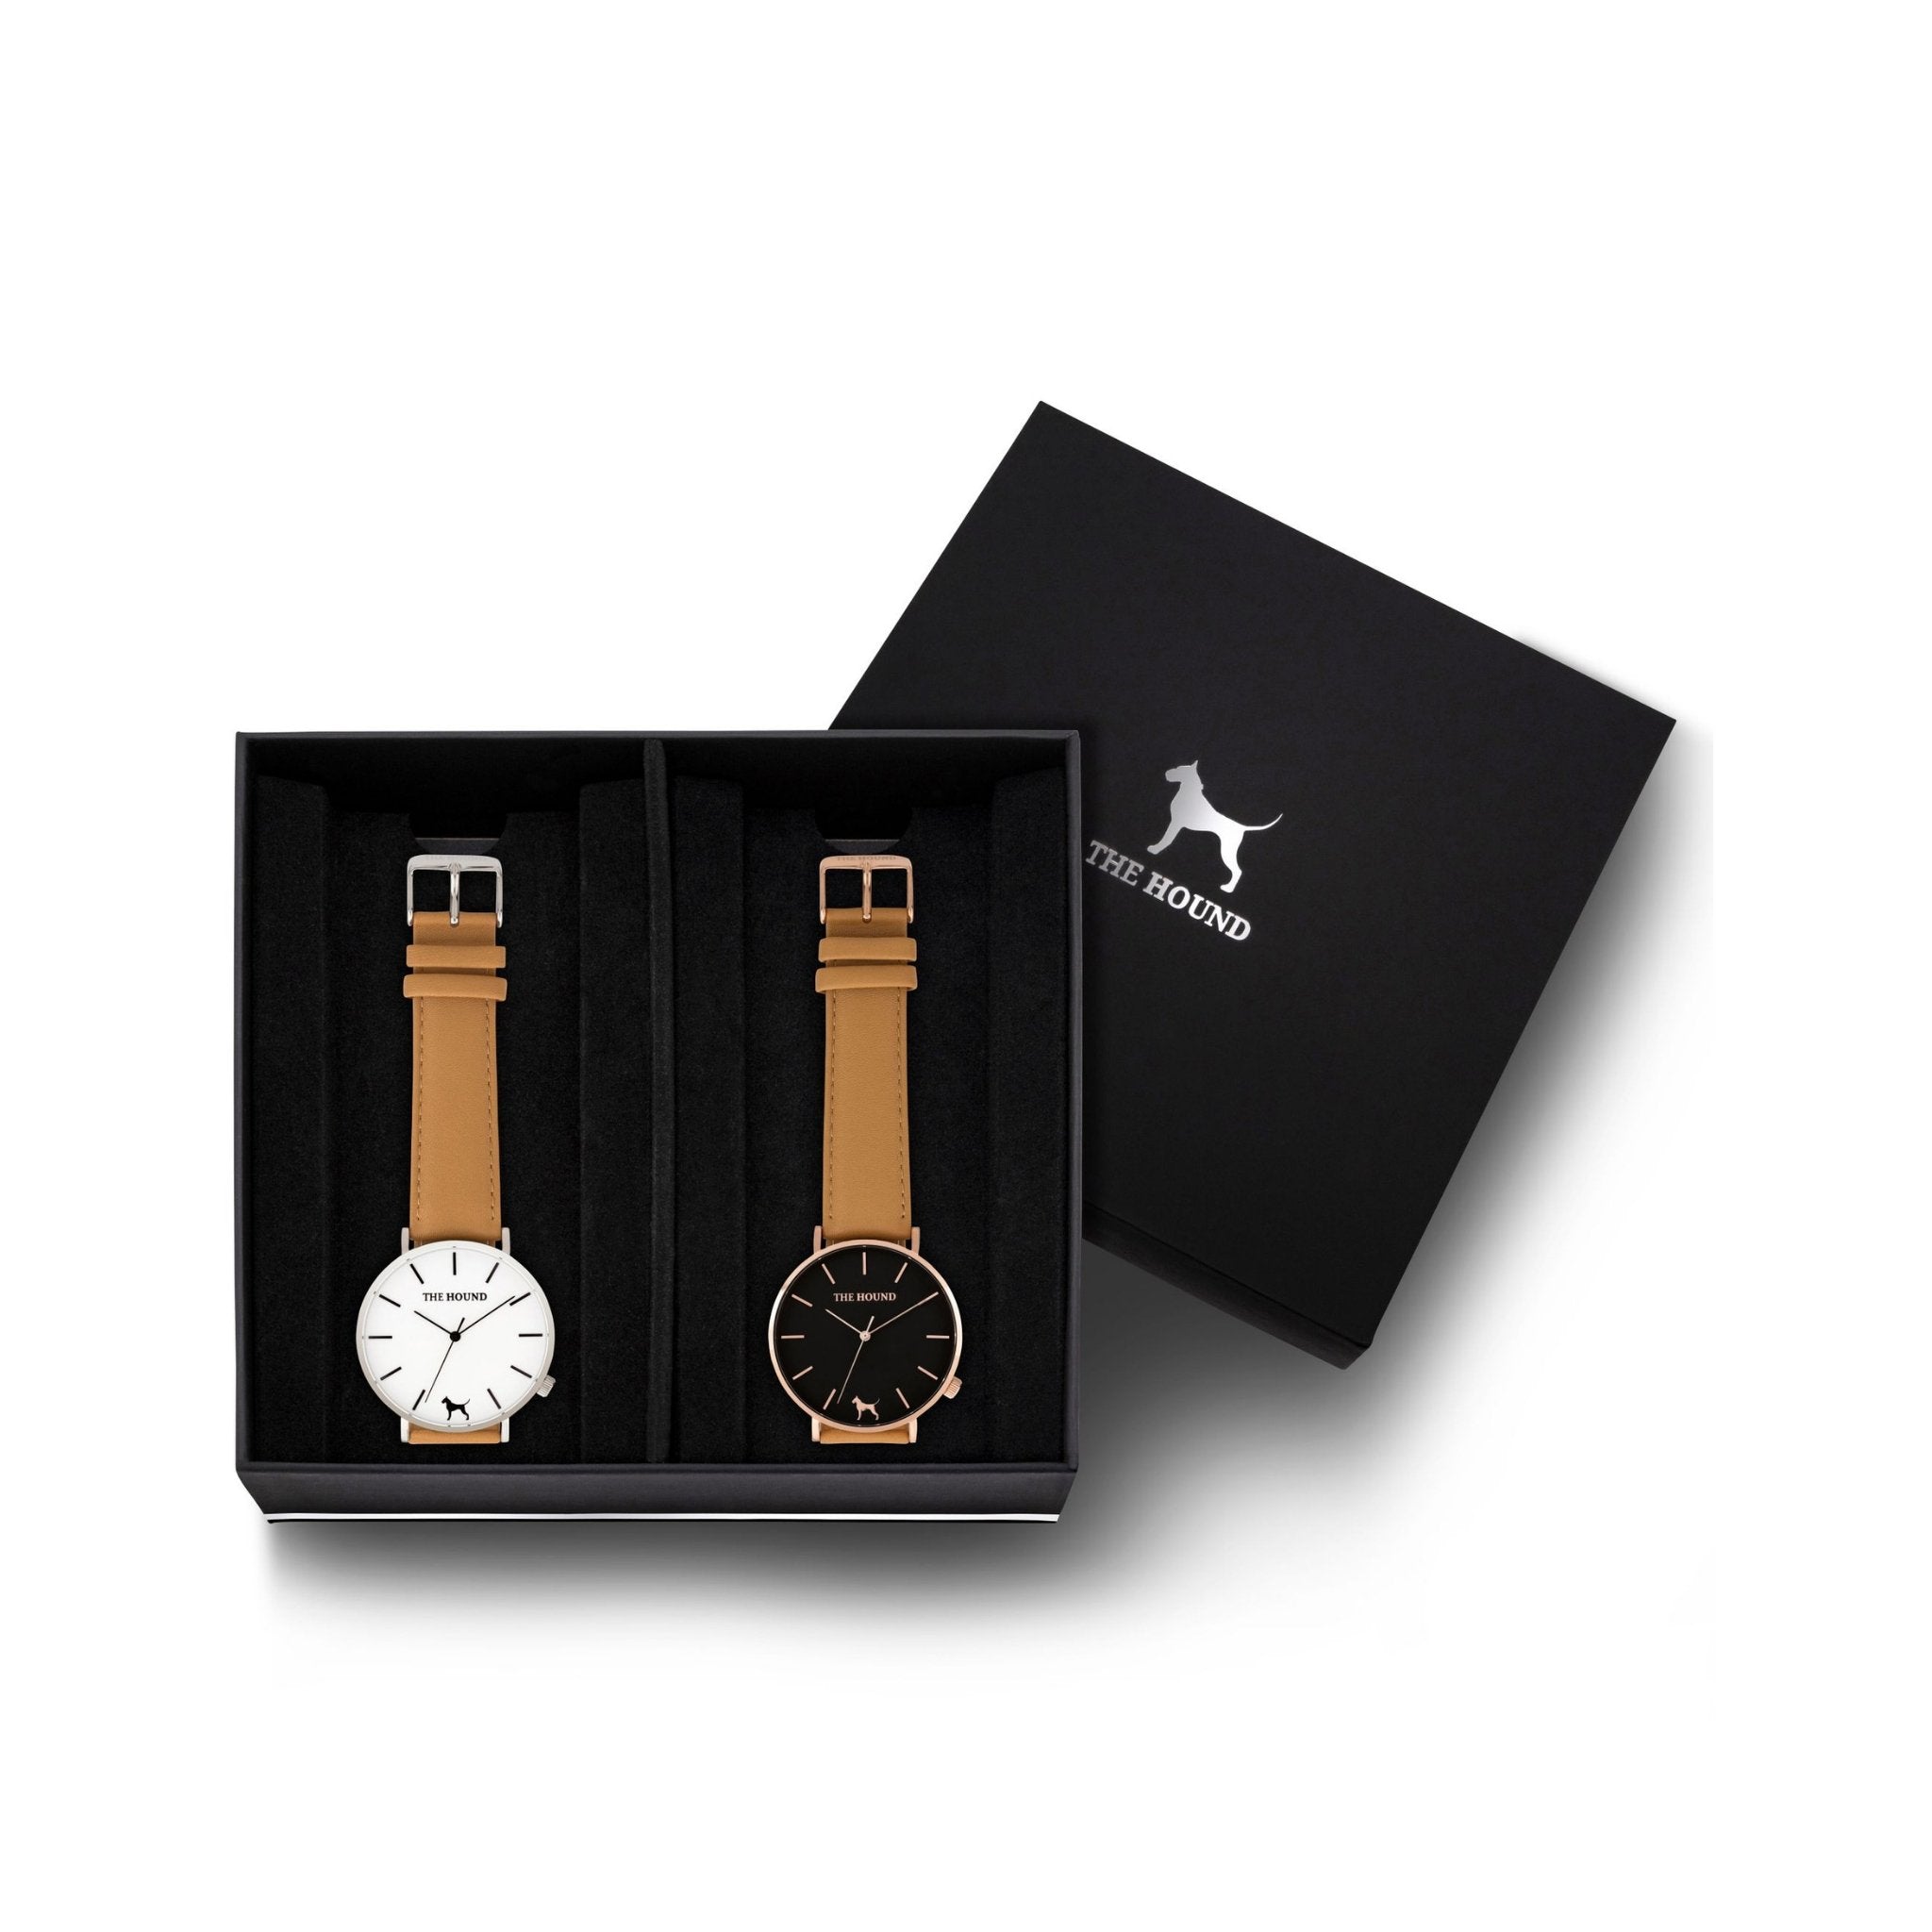 Custom gift set - Silver and white watch with stitched camel genuine leather band and a rose gold and black watch with stitched camel genuine leather band